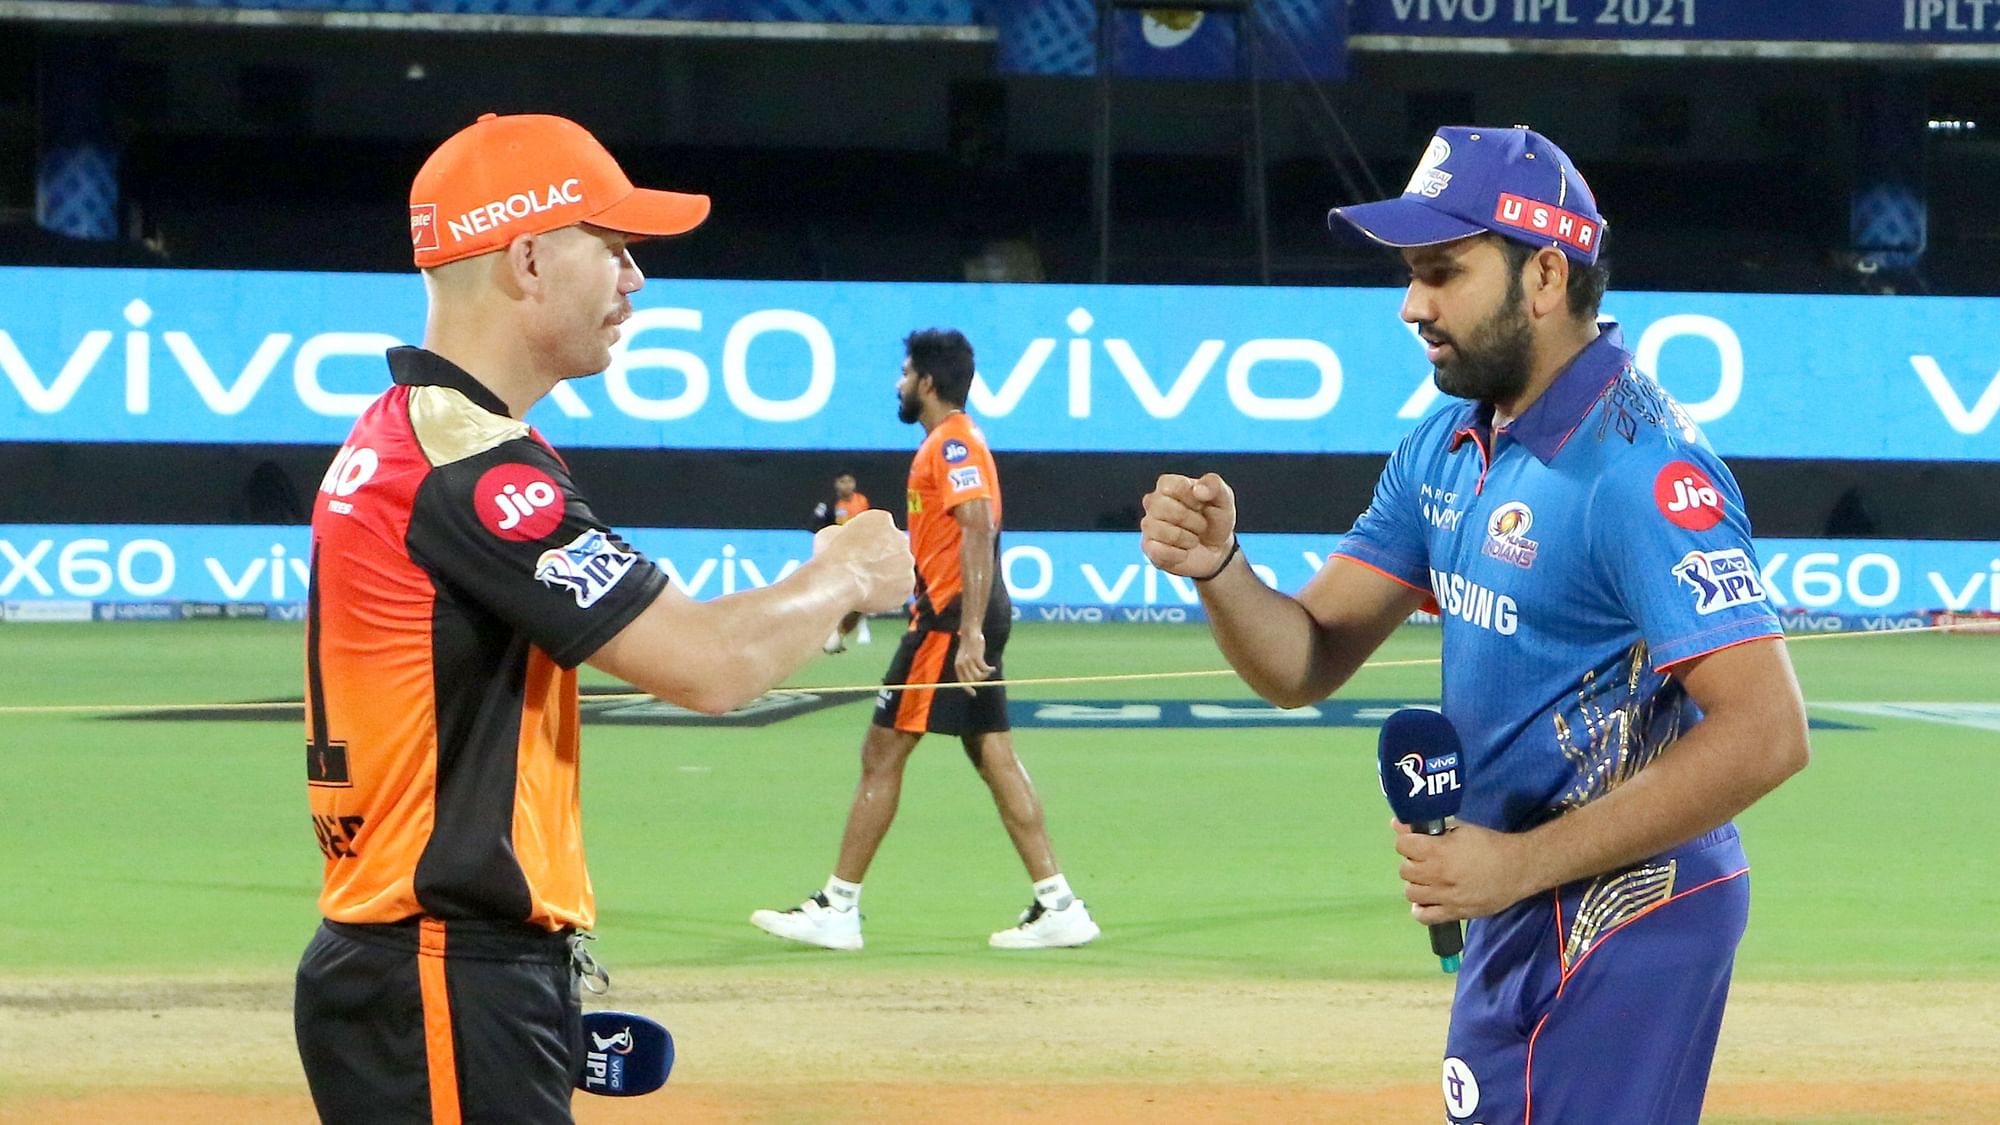 Rohit Sharma has won the toss and elected to bat first against David Warner’s Sunrisers Hyderabad.